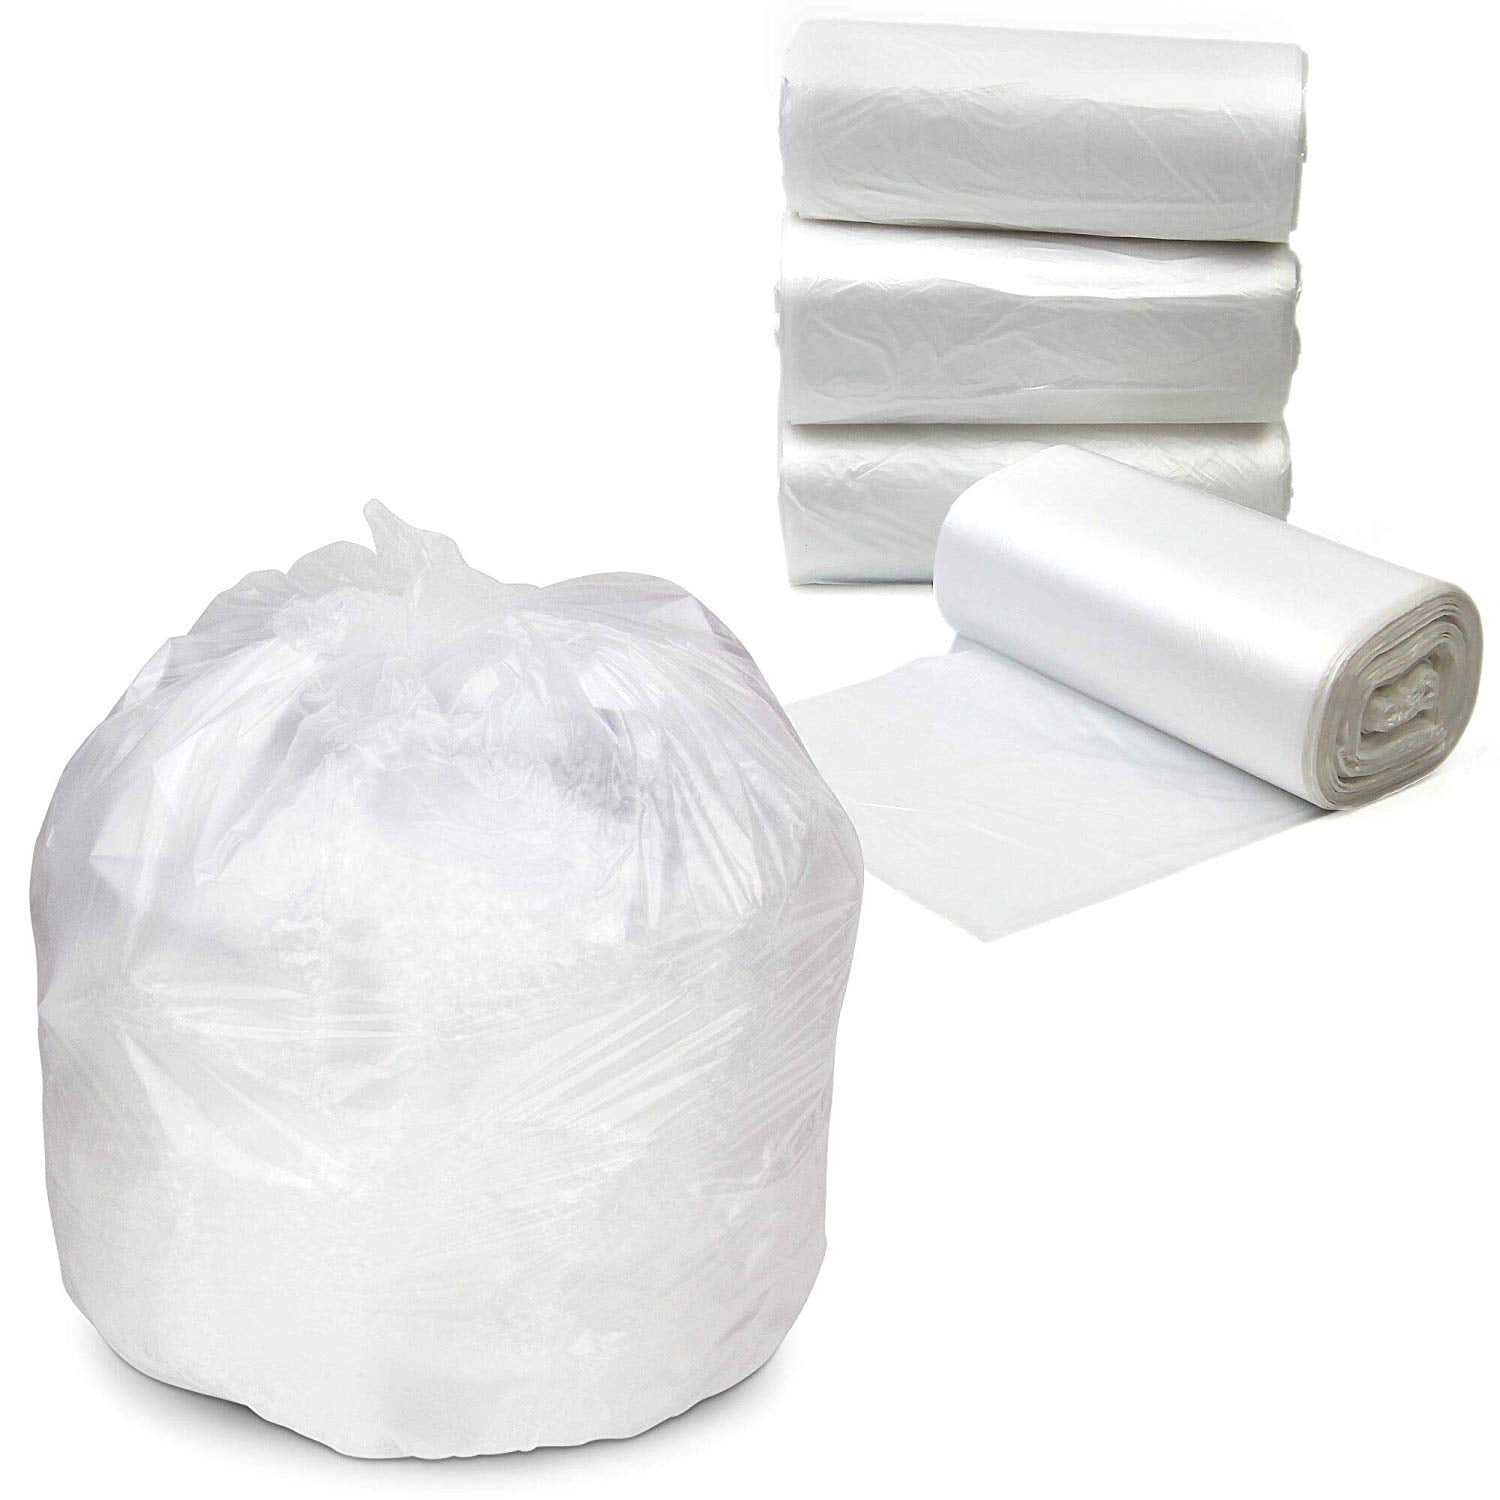 OKKEAI 4-5 Gallon Trash Bags Small Garbage Bags Bathroom Trash Can Bags150  Counts Wastebasket Liners for Office Kitchen,White,Fits 15-20 Liter Bins